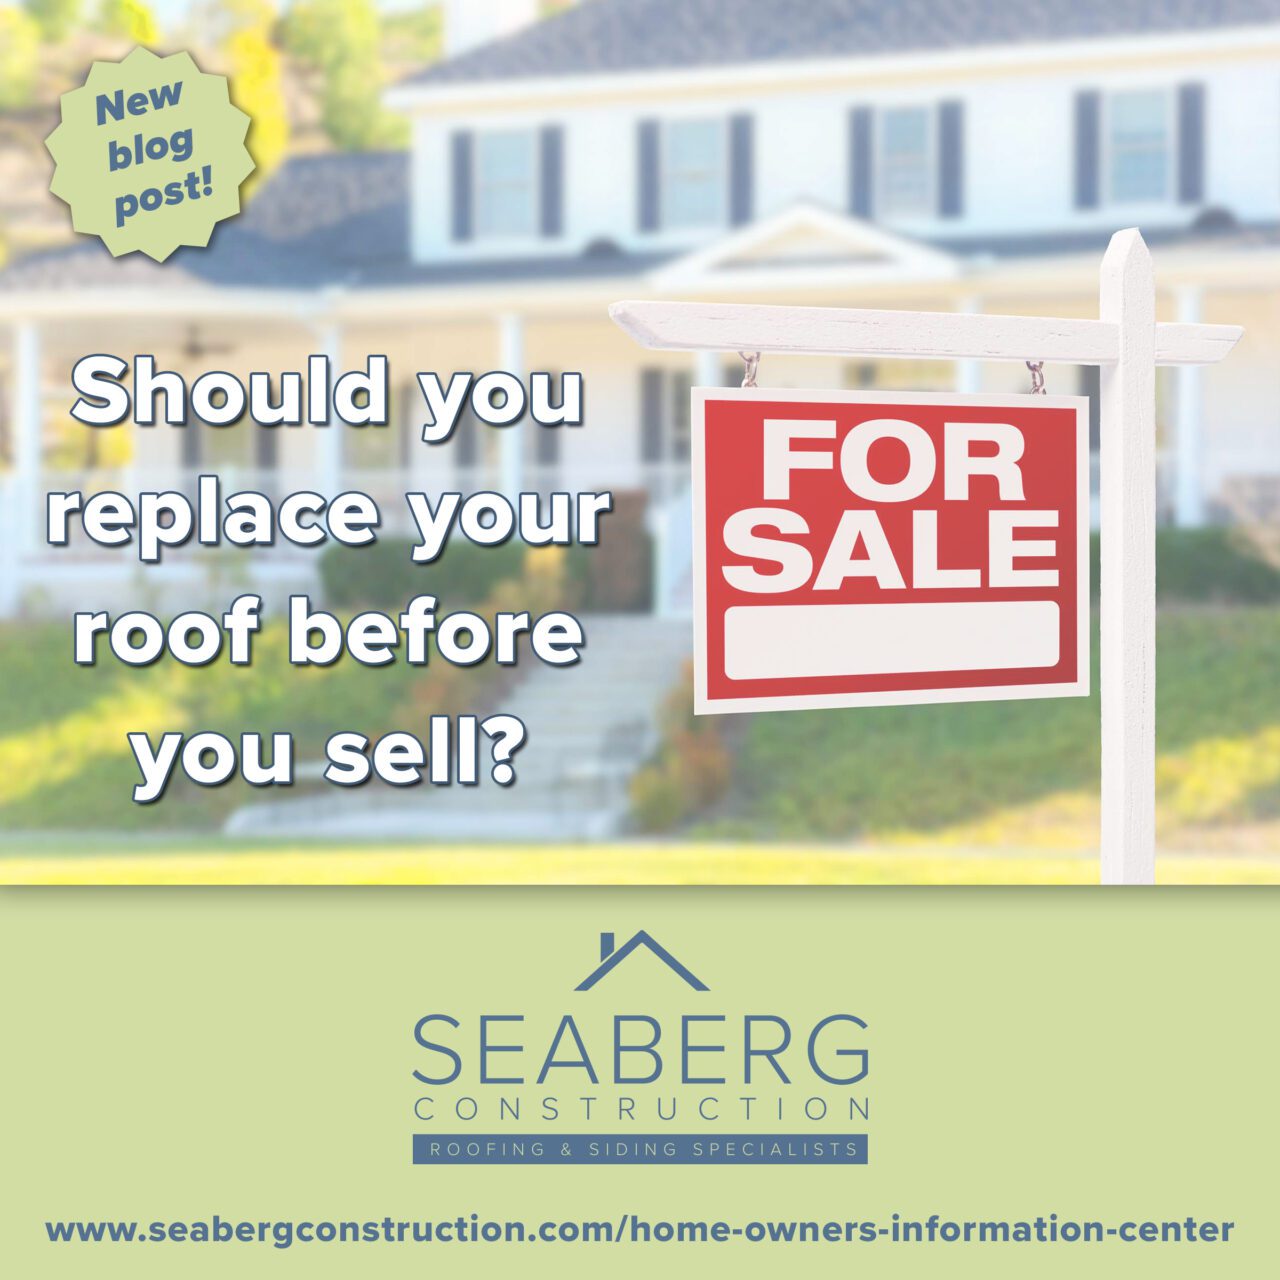 Seaberg Construction Blog: Should You Replace Your Roof Before You Sell?